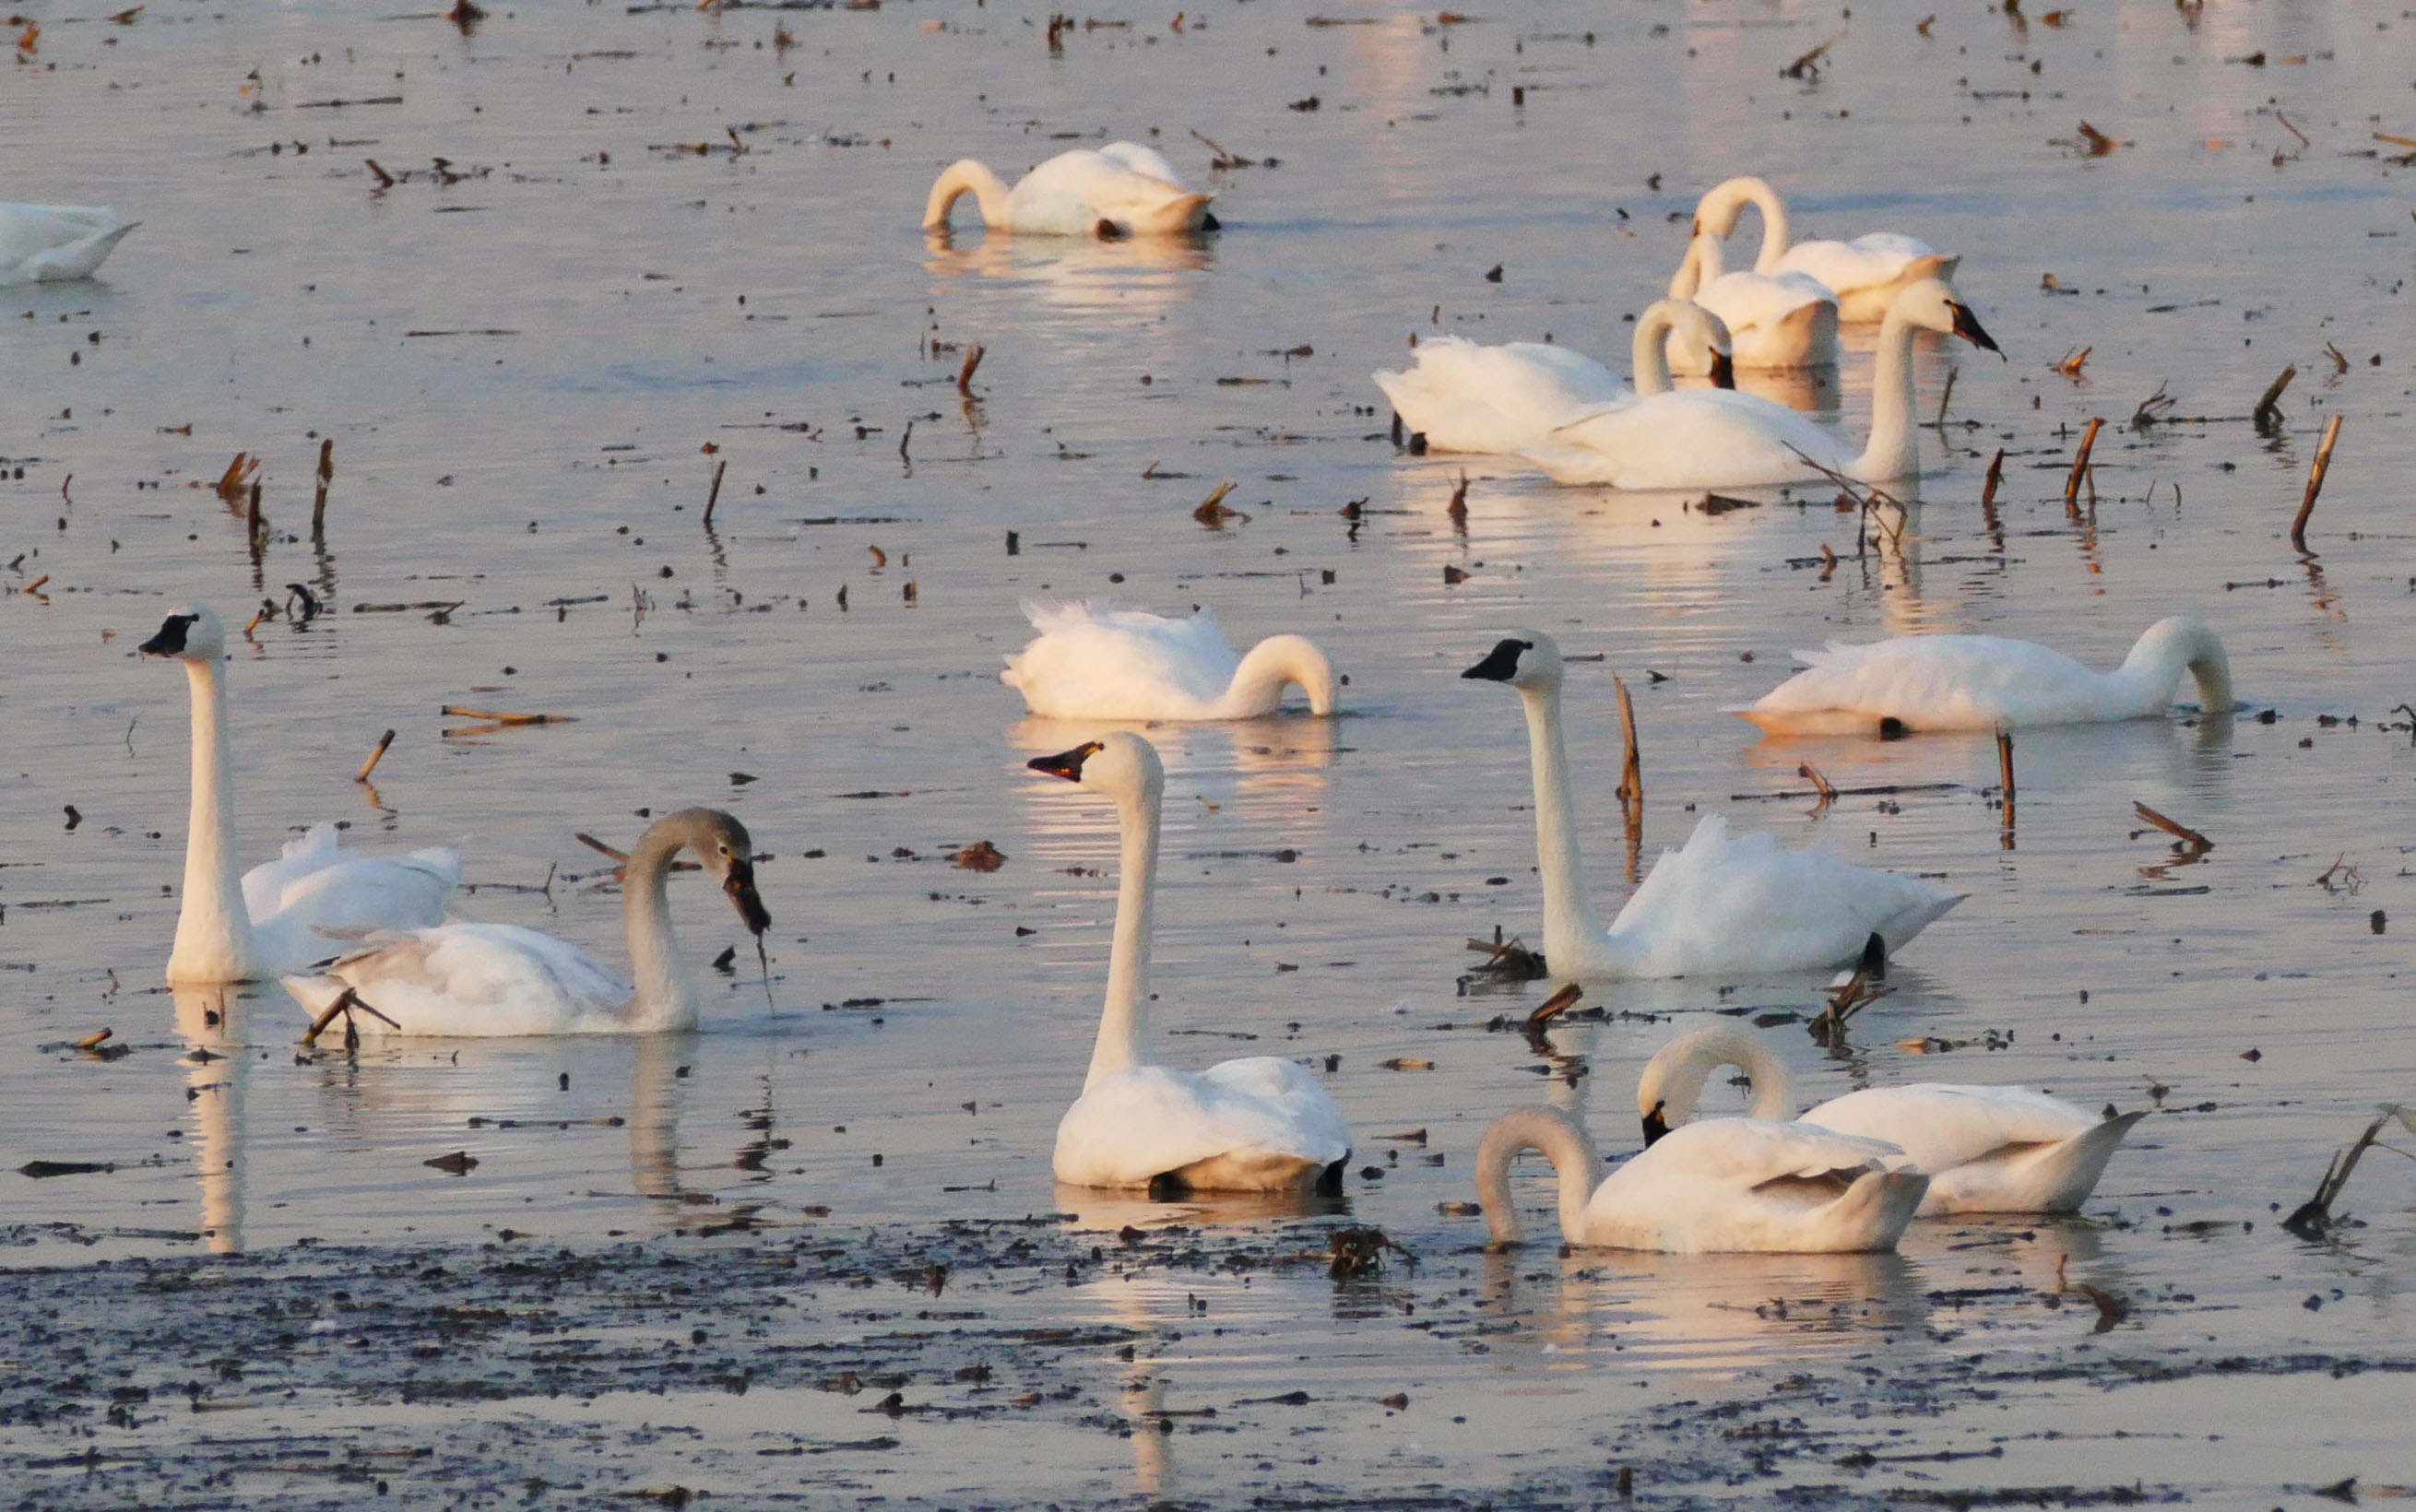 Tundra Swans swimming in a flooded field